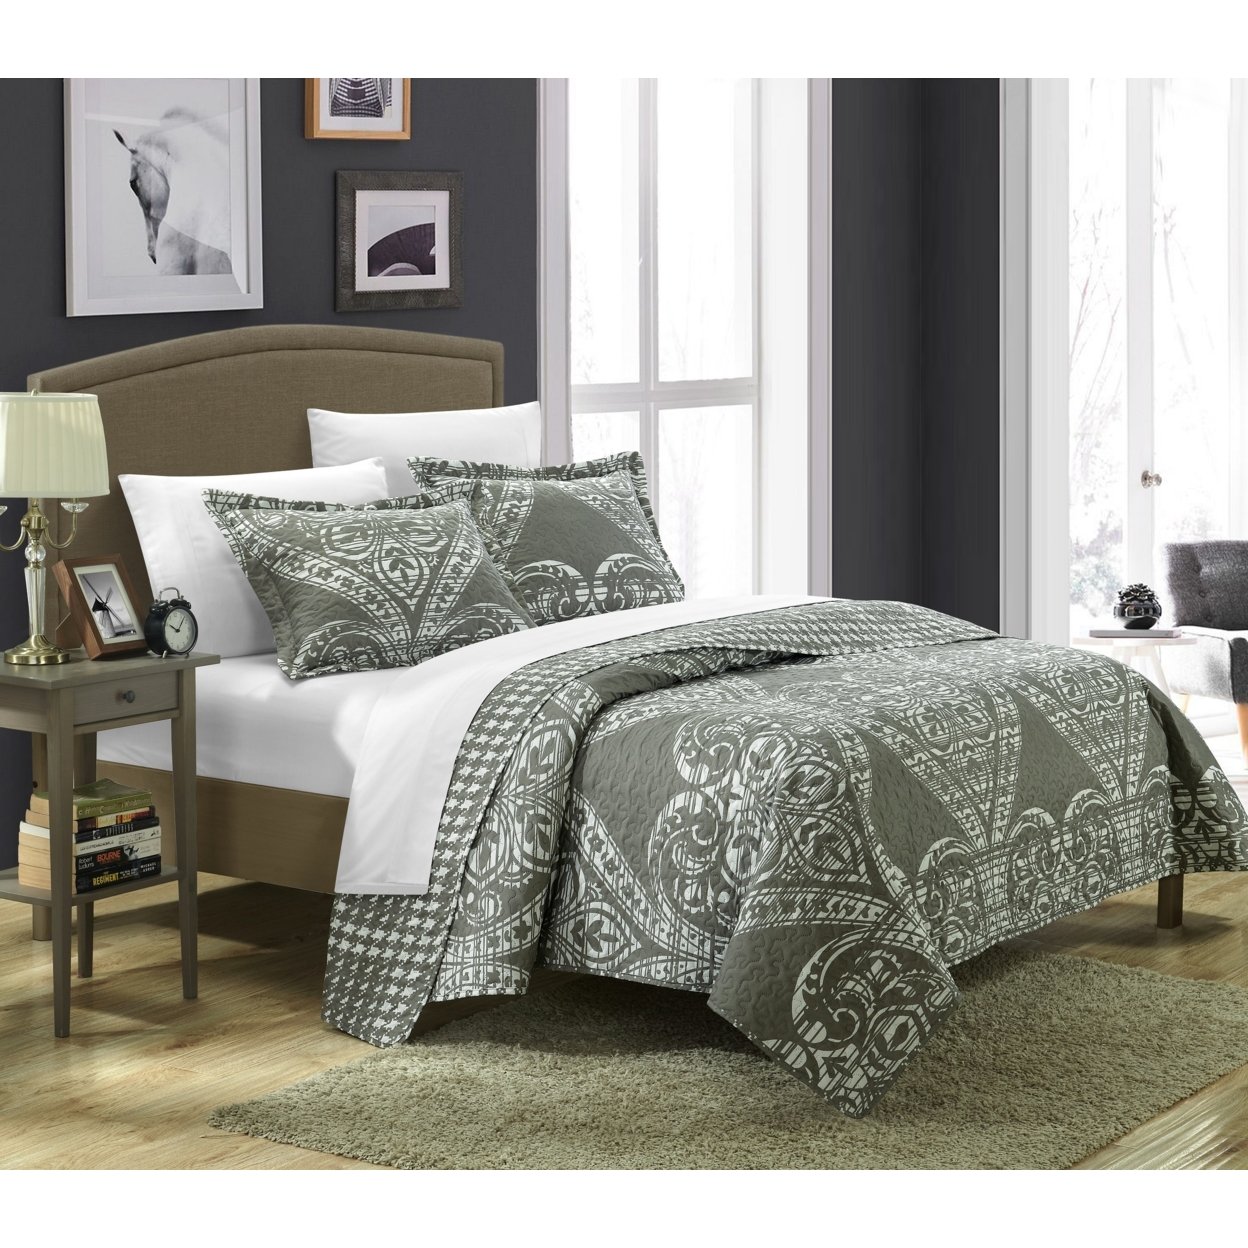 3 Or 2 Piece Revenna REVERSIBLE Printed Quilt Set. Front A Traditional Pattern And Reverses Into A Houndstooth Pattern - Beige, King